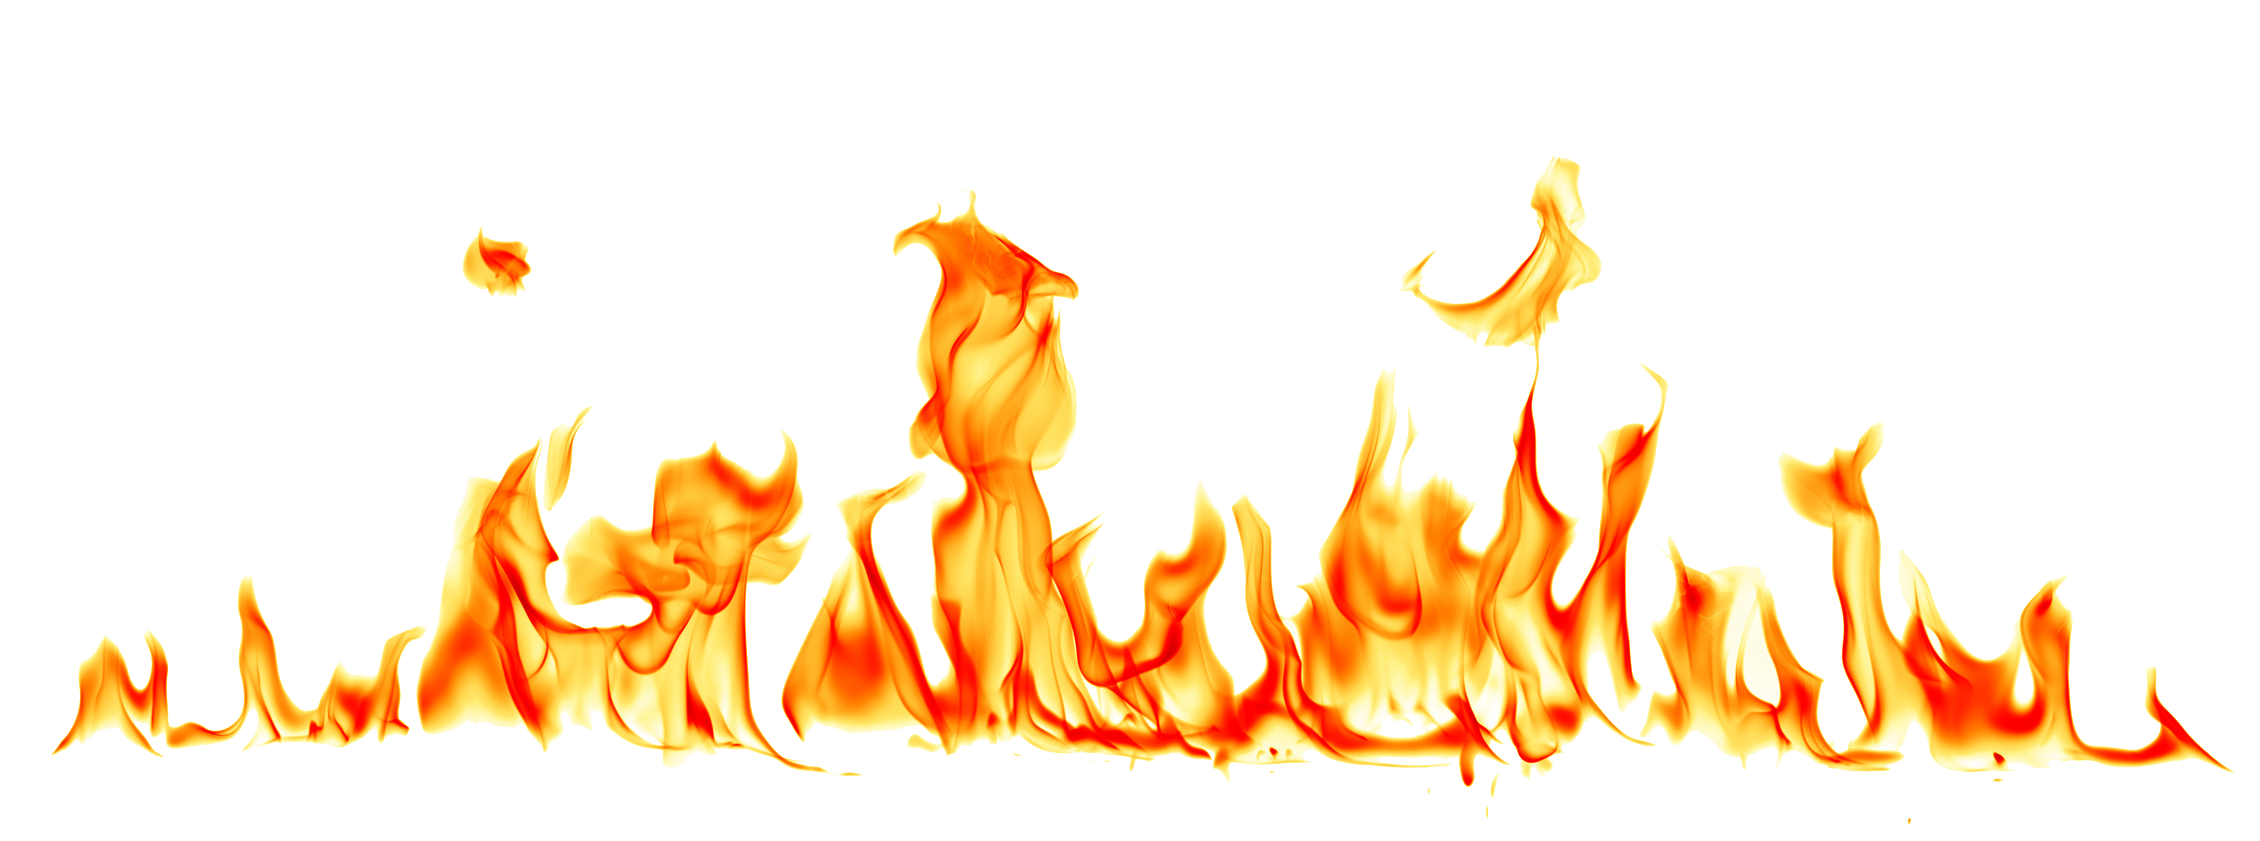 free clipart flames of fire - photo #38